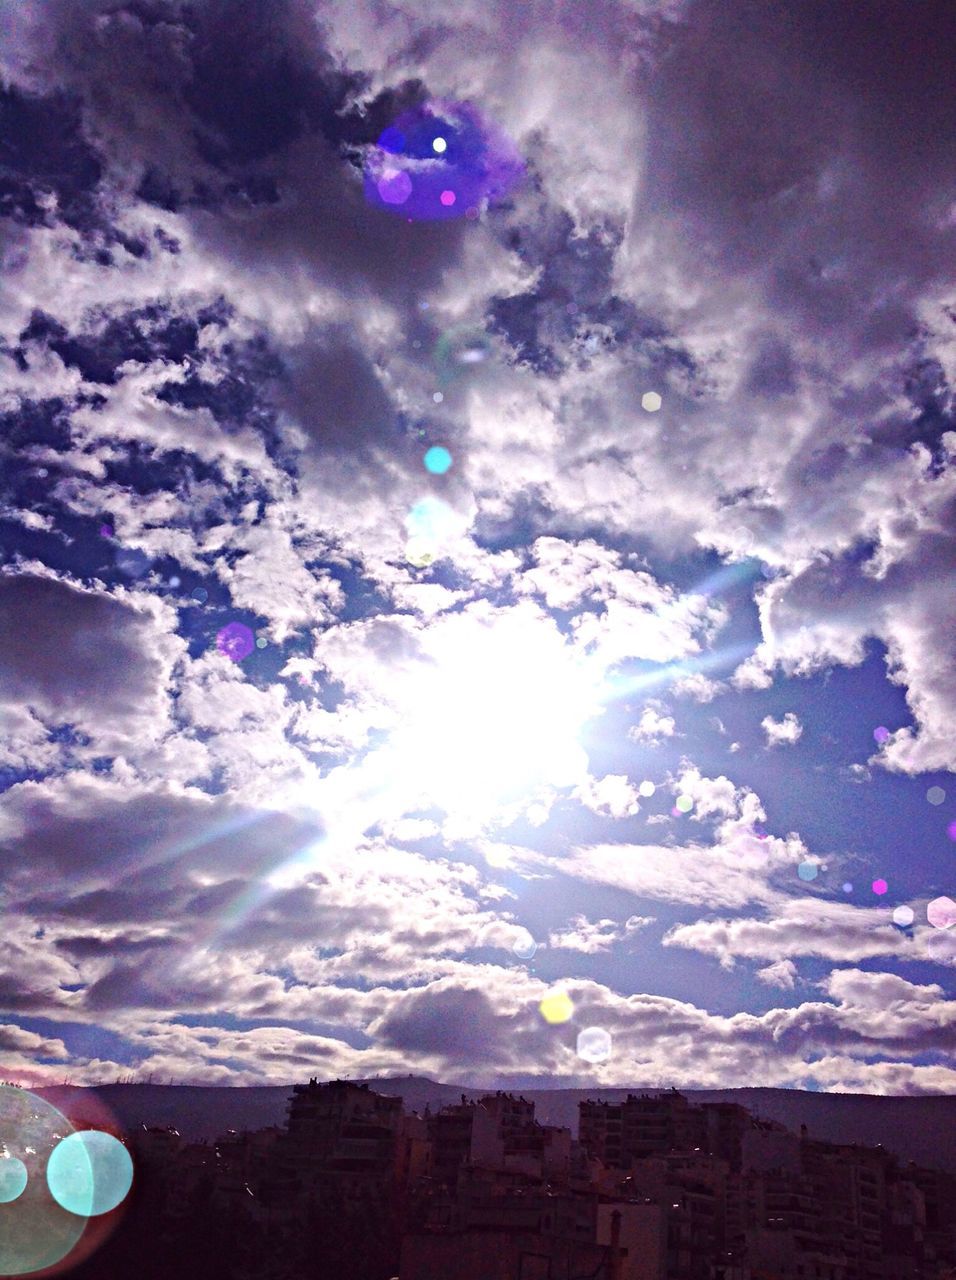 sky, cloud - sky, sun, lens flare, beauty in nature, sunbeam, sunlight, nature, weather, scenics, cloudy, tranquility, blue, cloud, tranquil scene, outdoors, no people, low angle view, rainbow, day